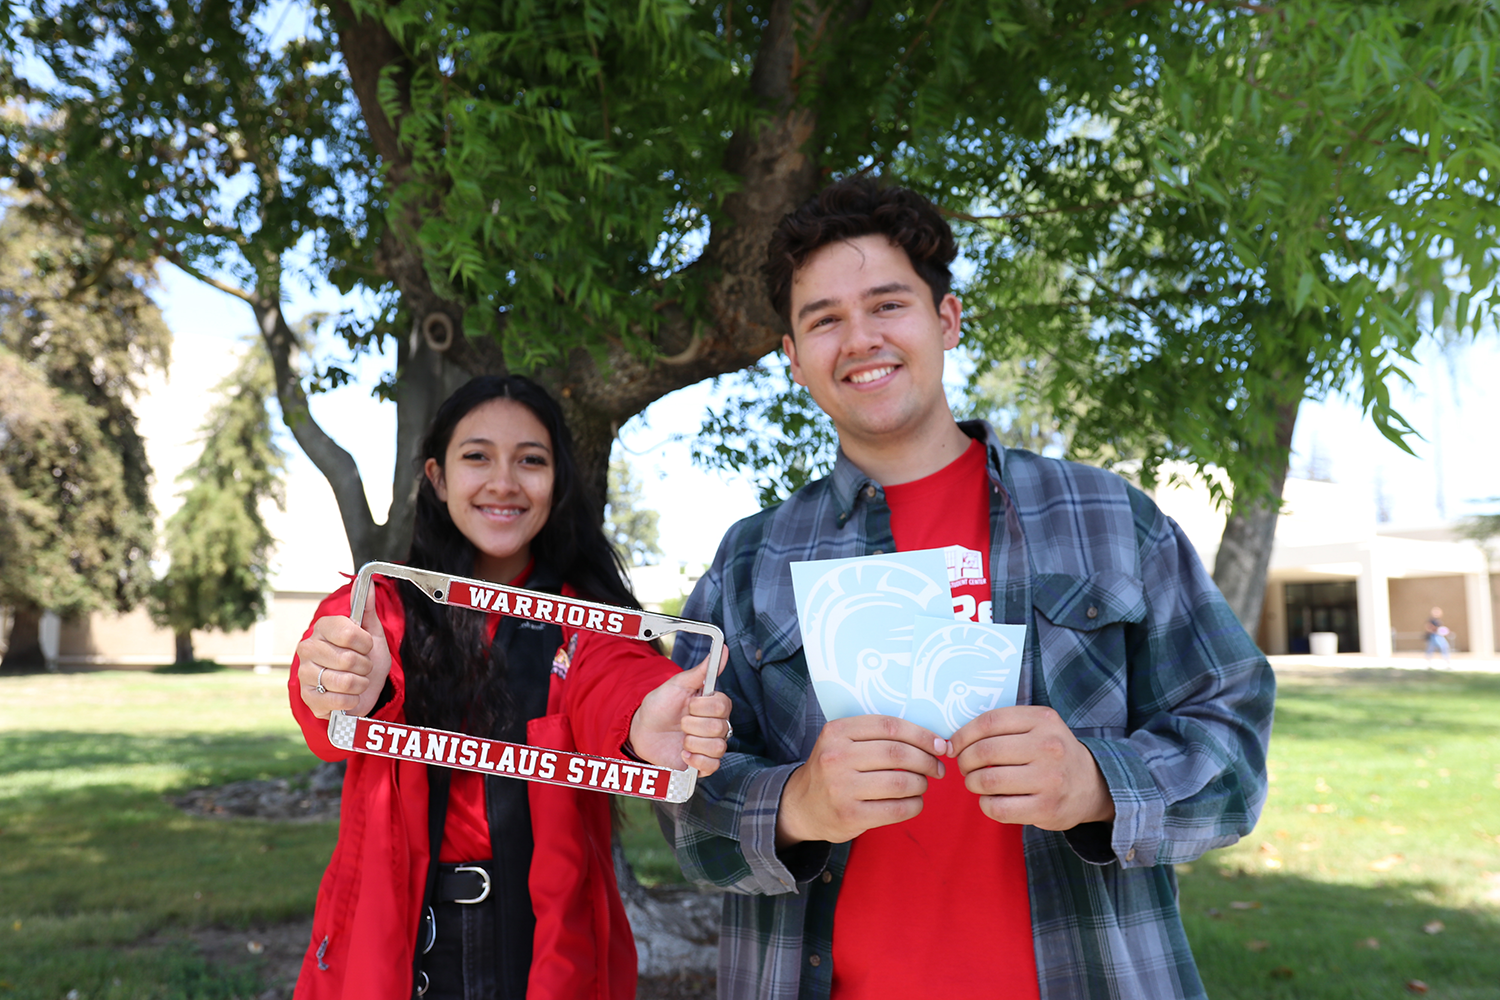 students holding license plate frame and decals